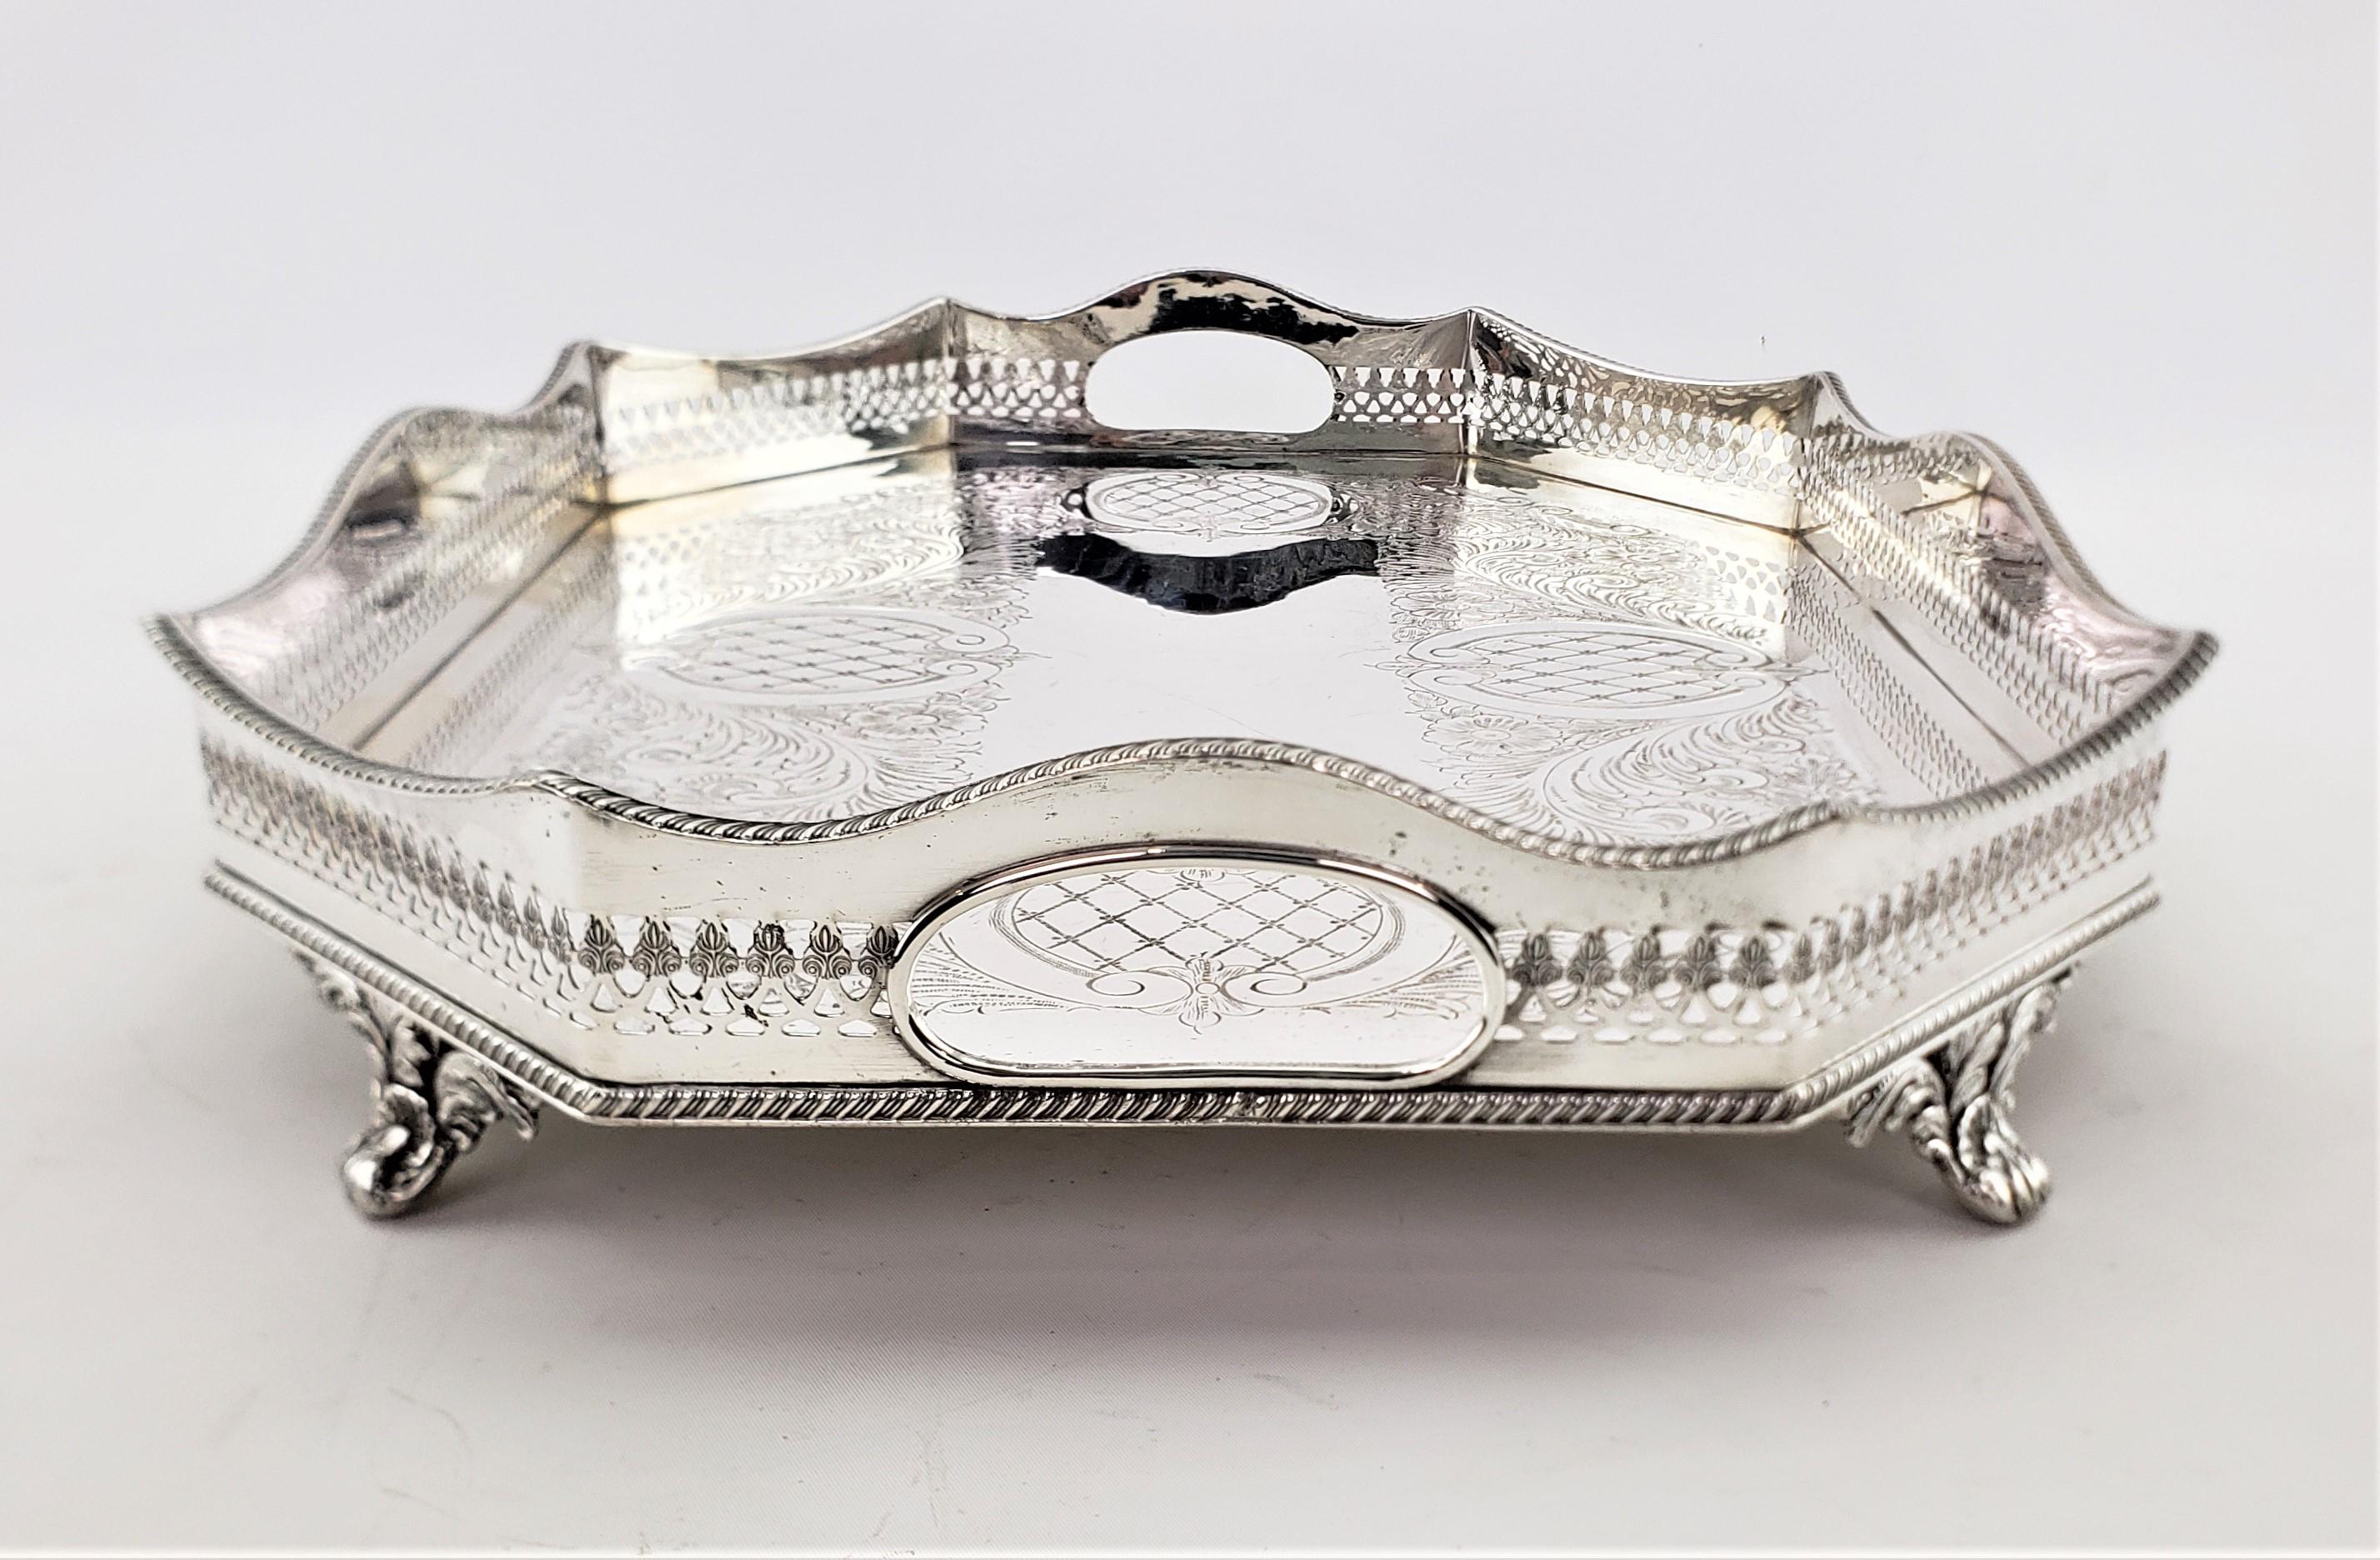 Edwardian Antique English Silver Plated Footed Gallery Serving Tray with Ornate Engraving